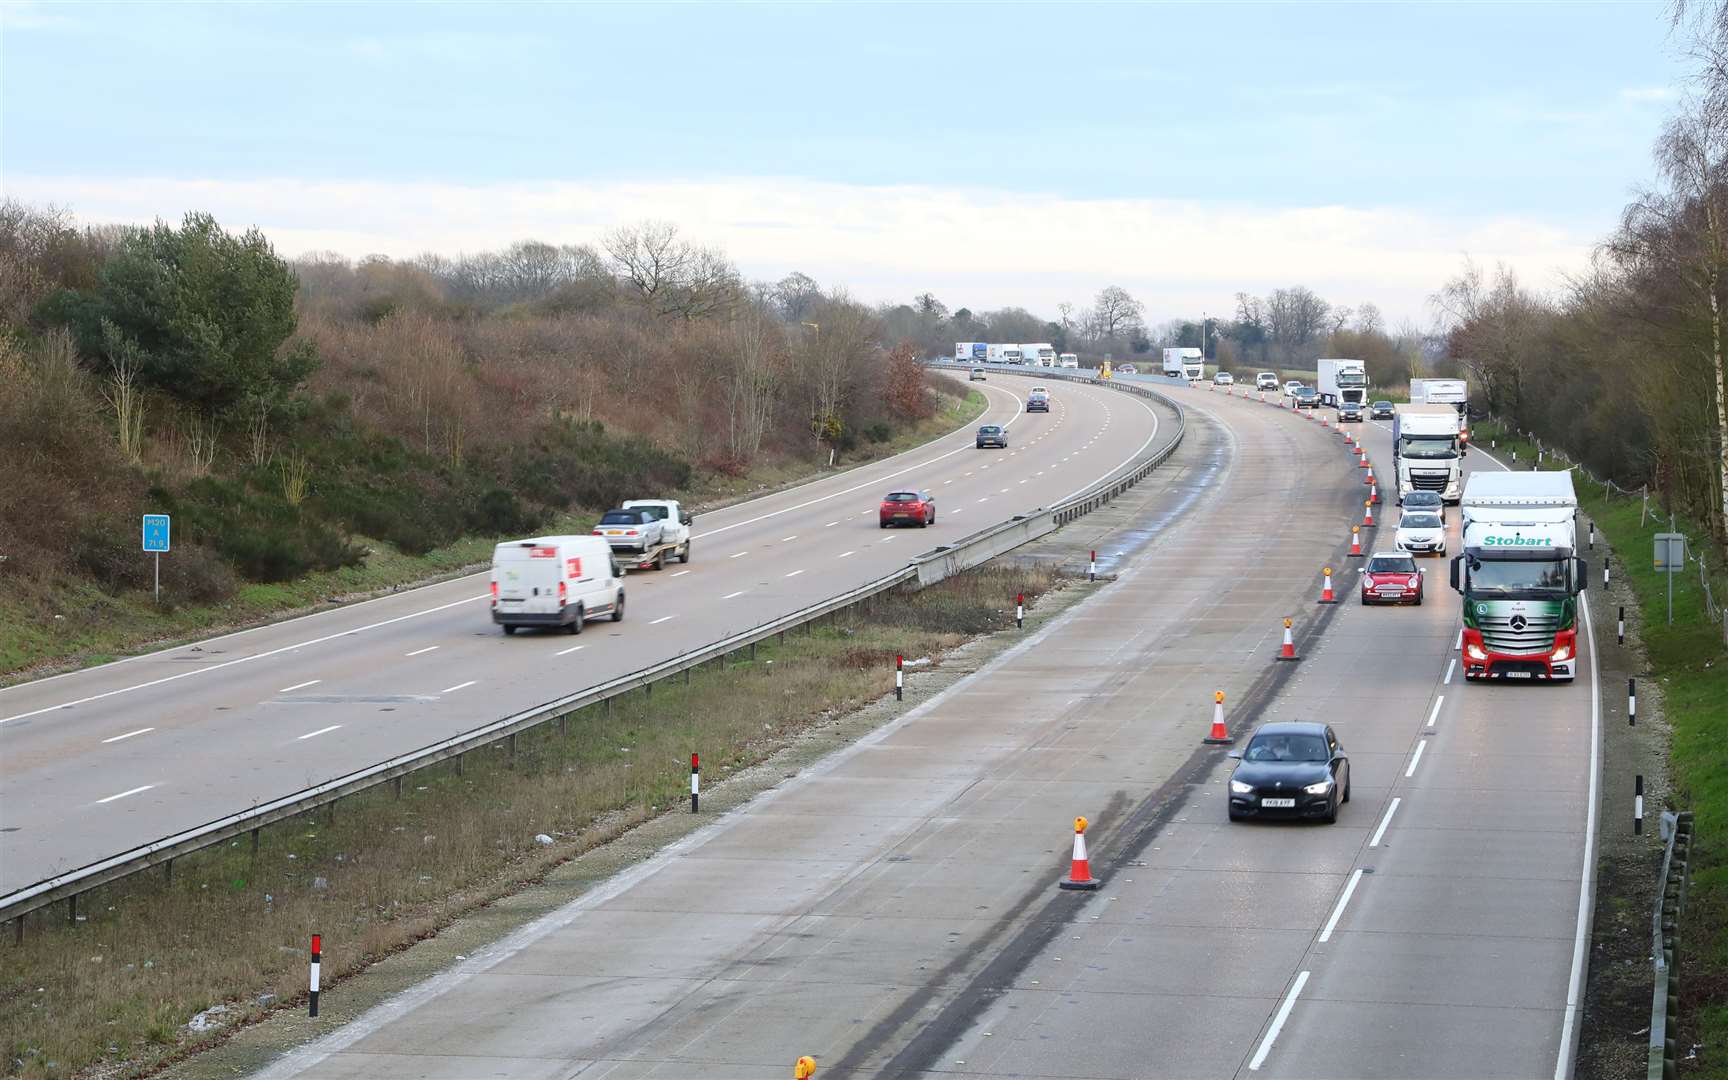 Progress of the removal of Operation Brock barriers on the M20